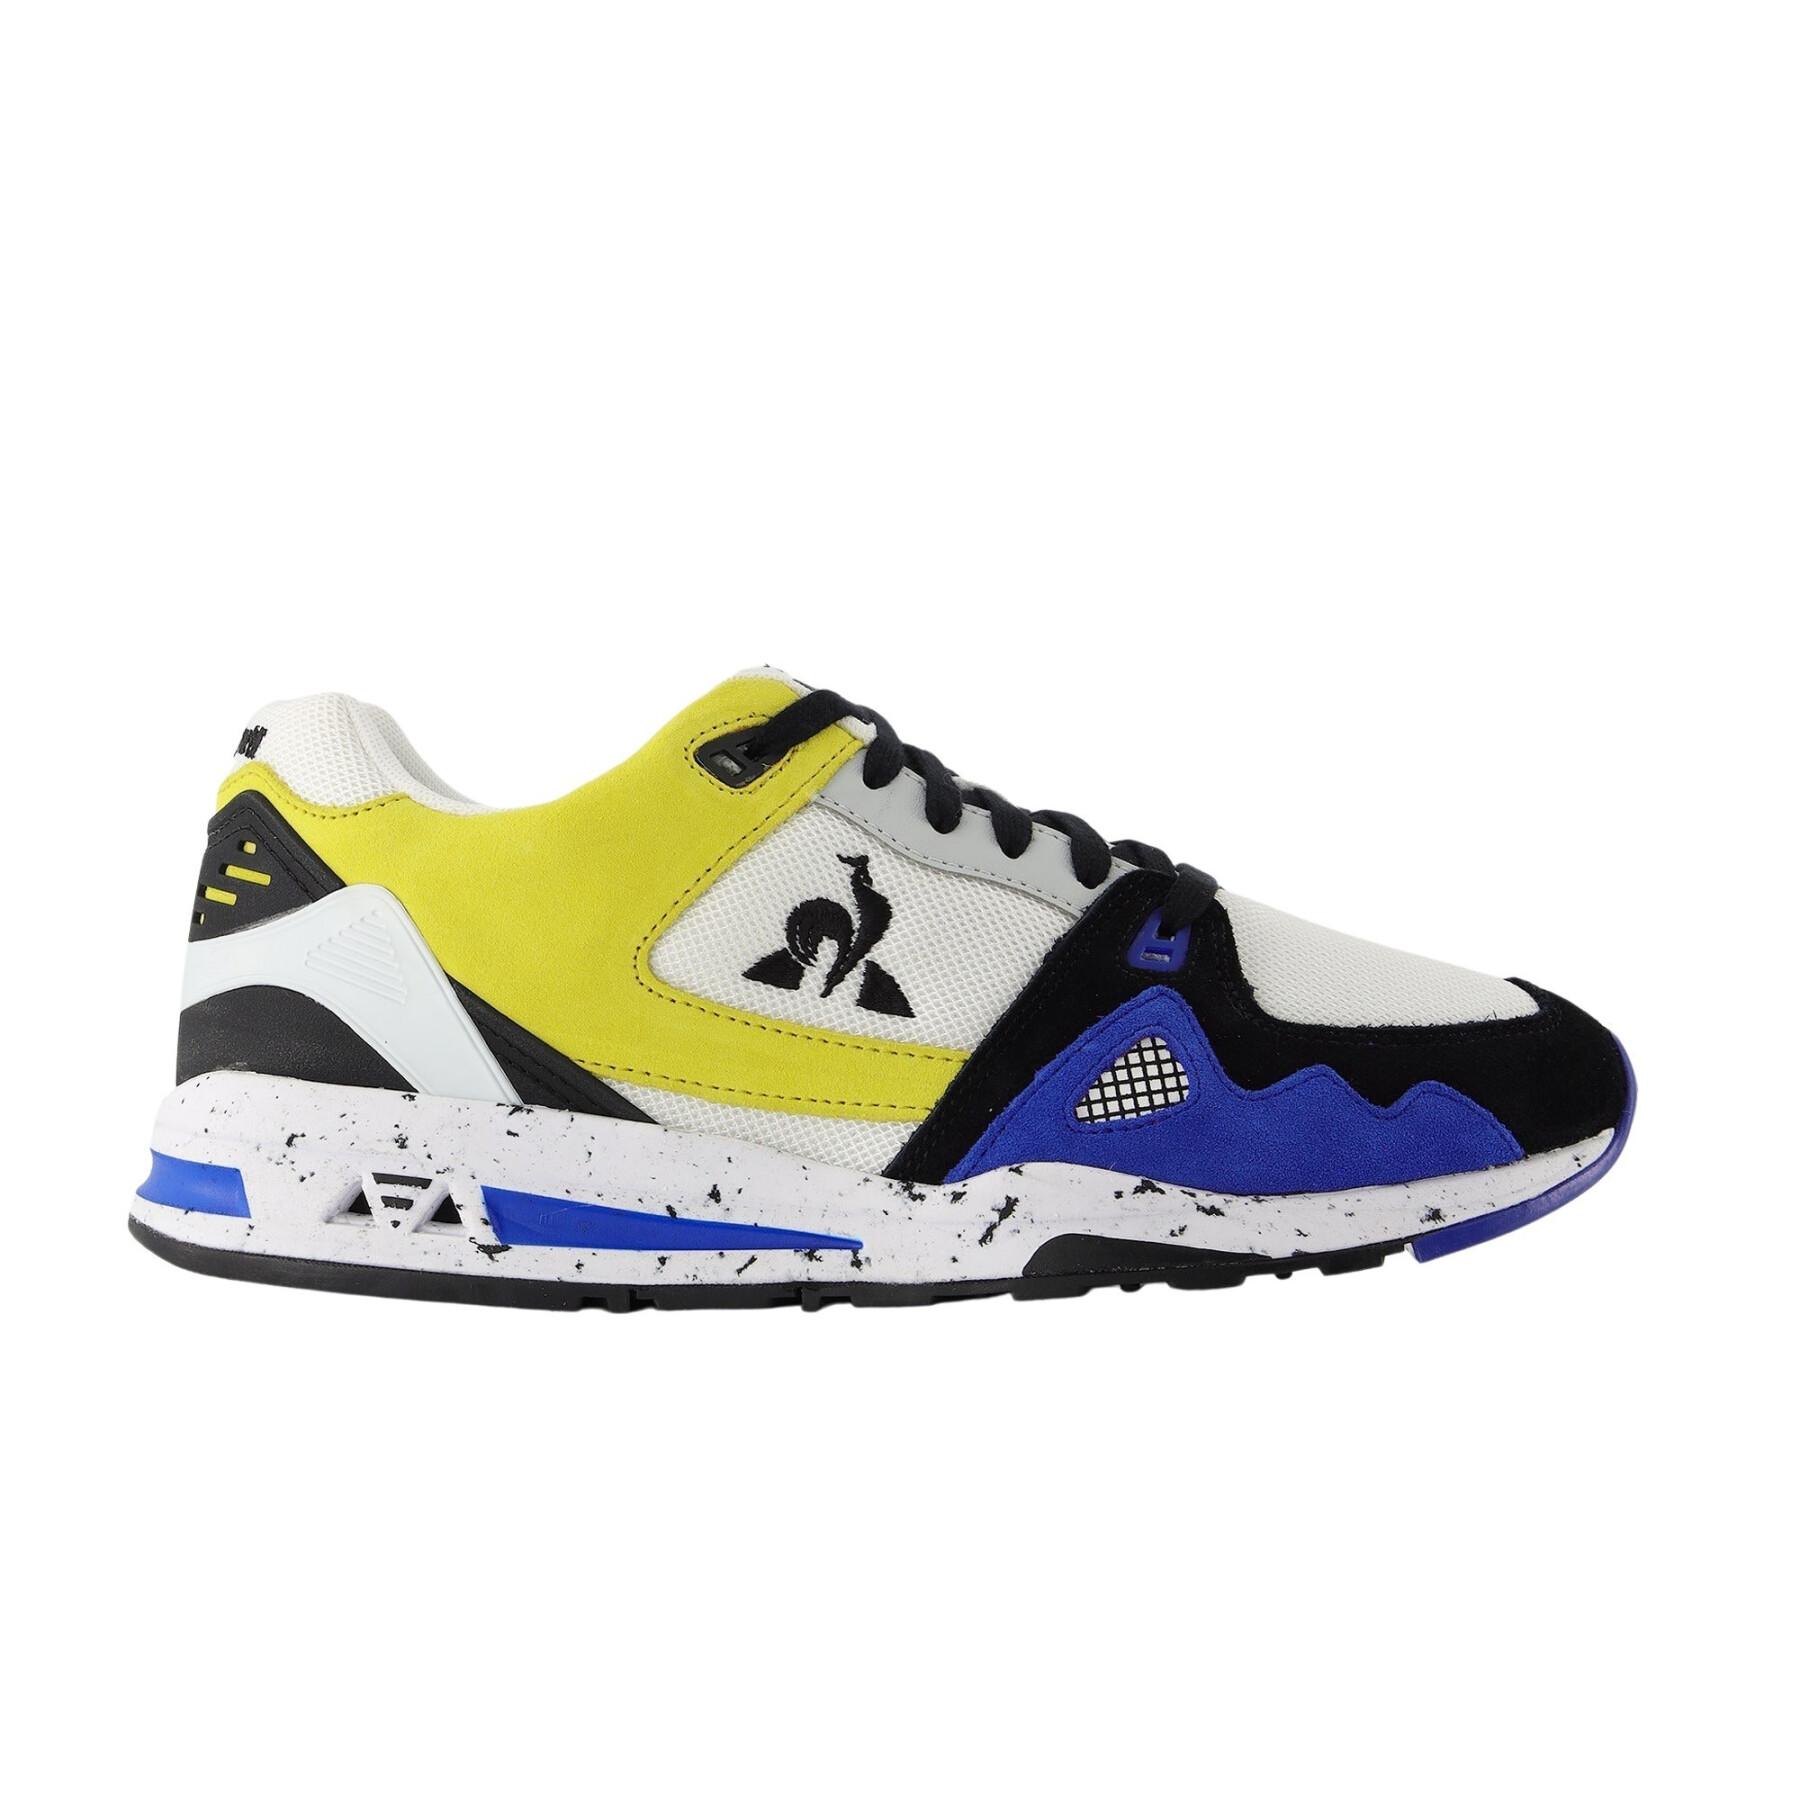 Formadores Le Coq Sportif Lcs R Trail Winter Craft